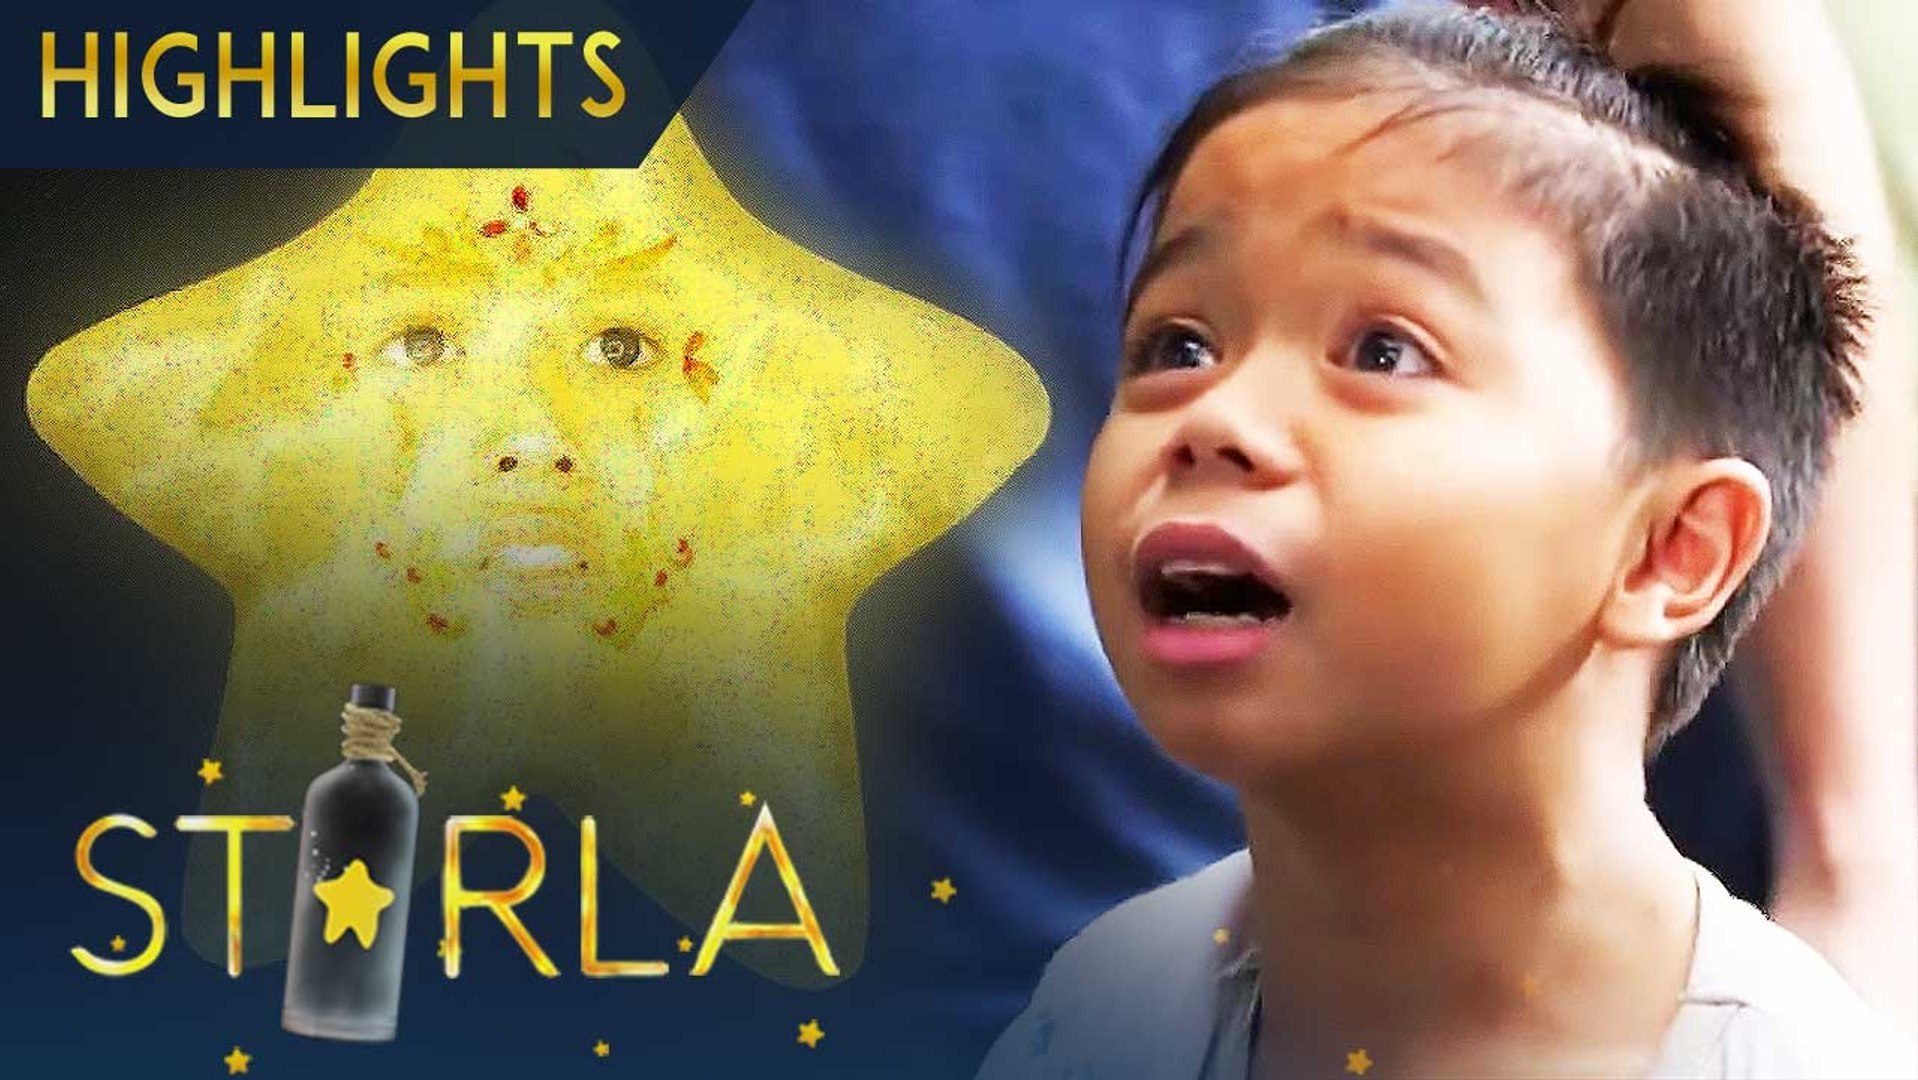 Residents of Barrio Maulap help look for Starla | Starla